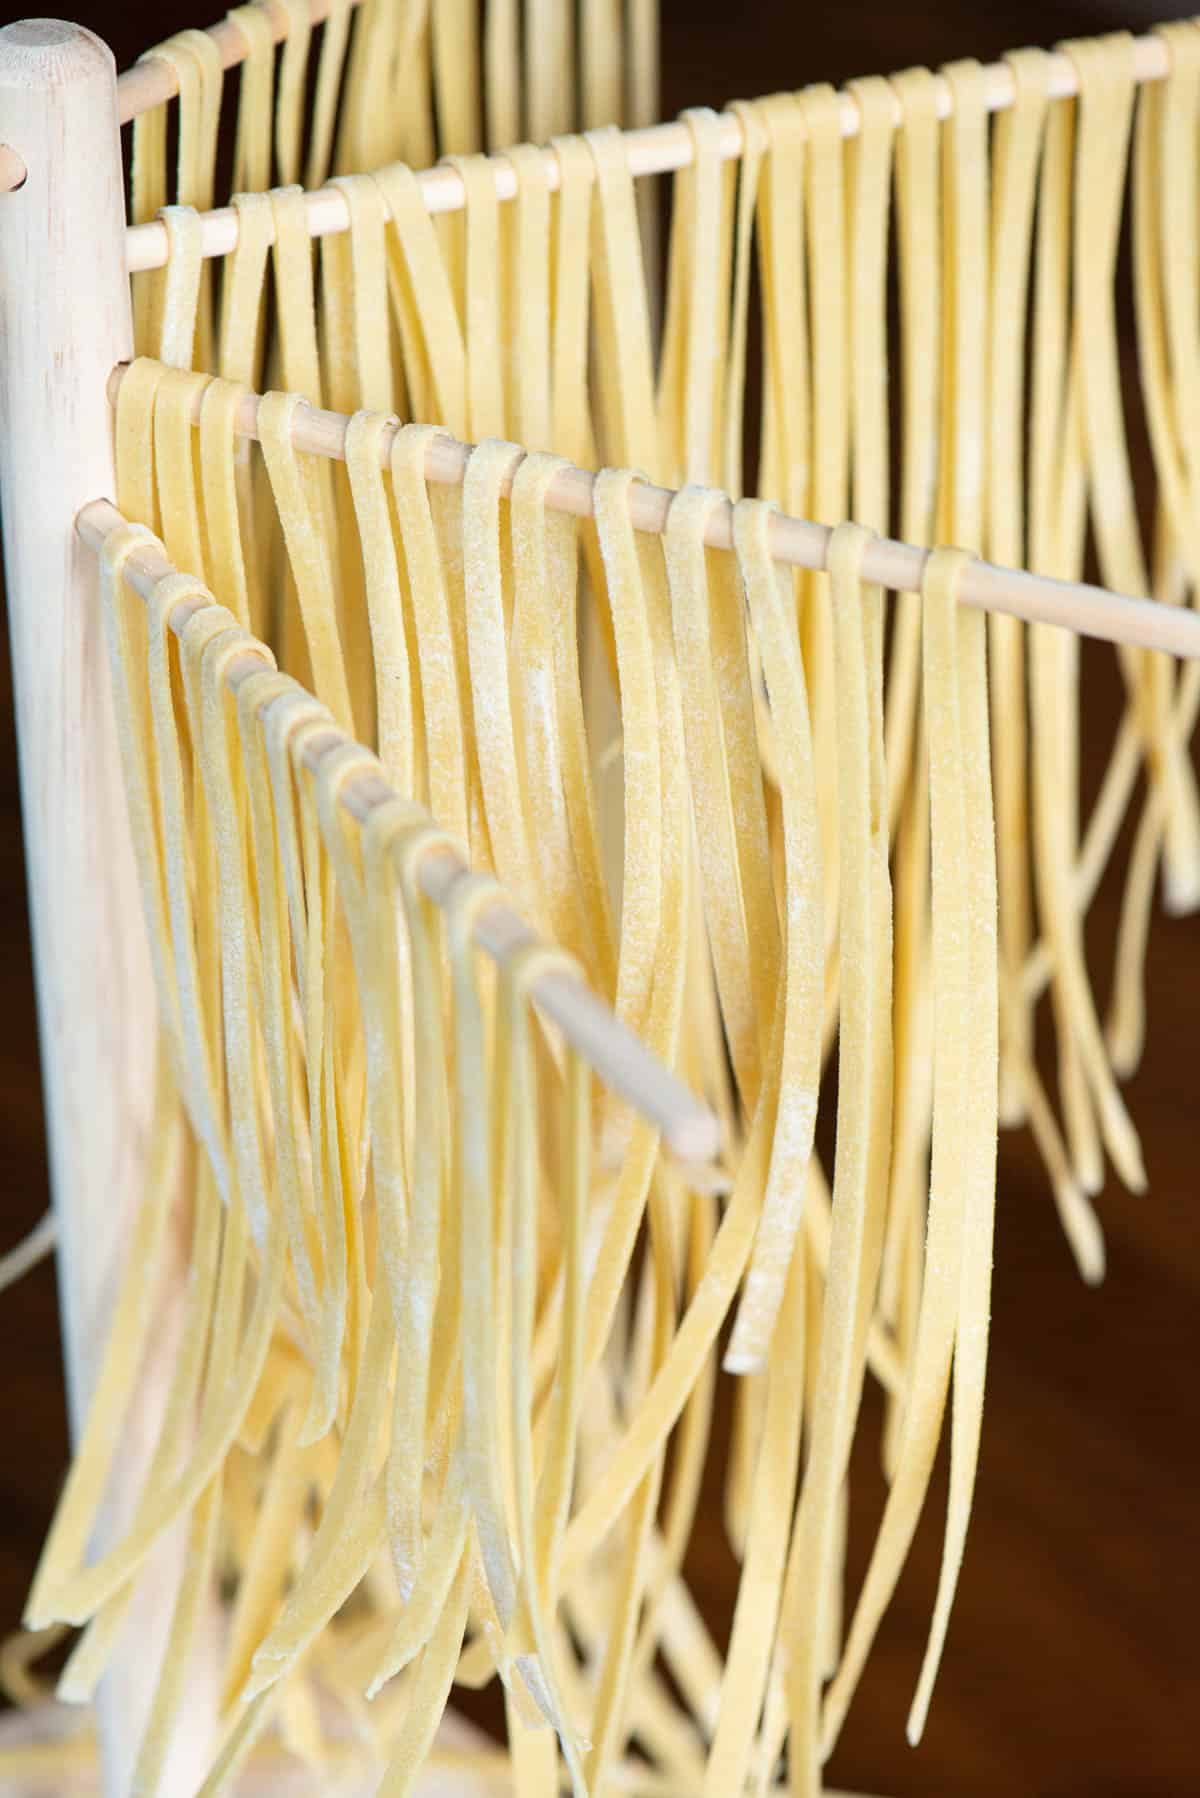 homemade pasta that has been hung to dry.